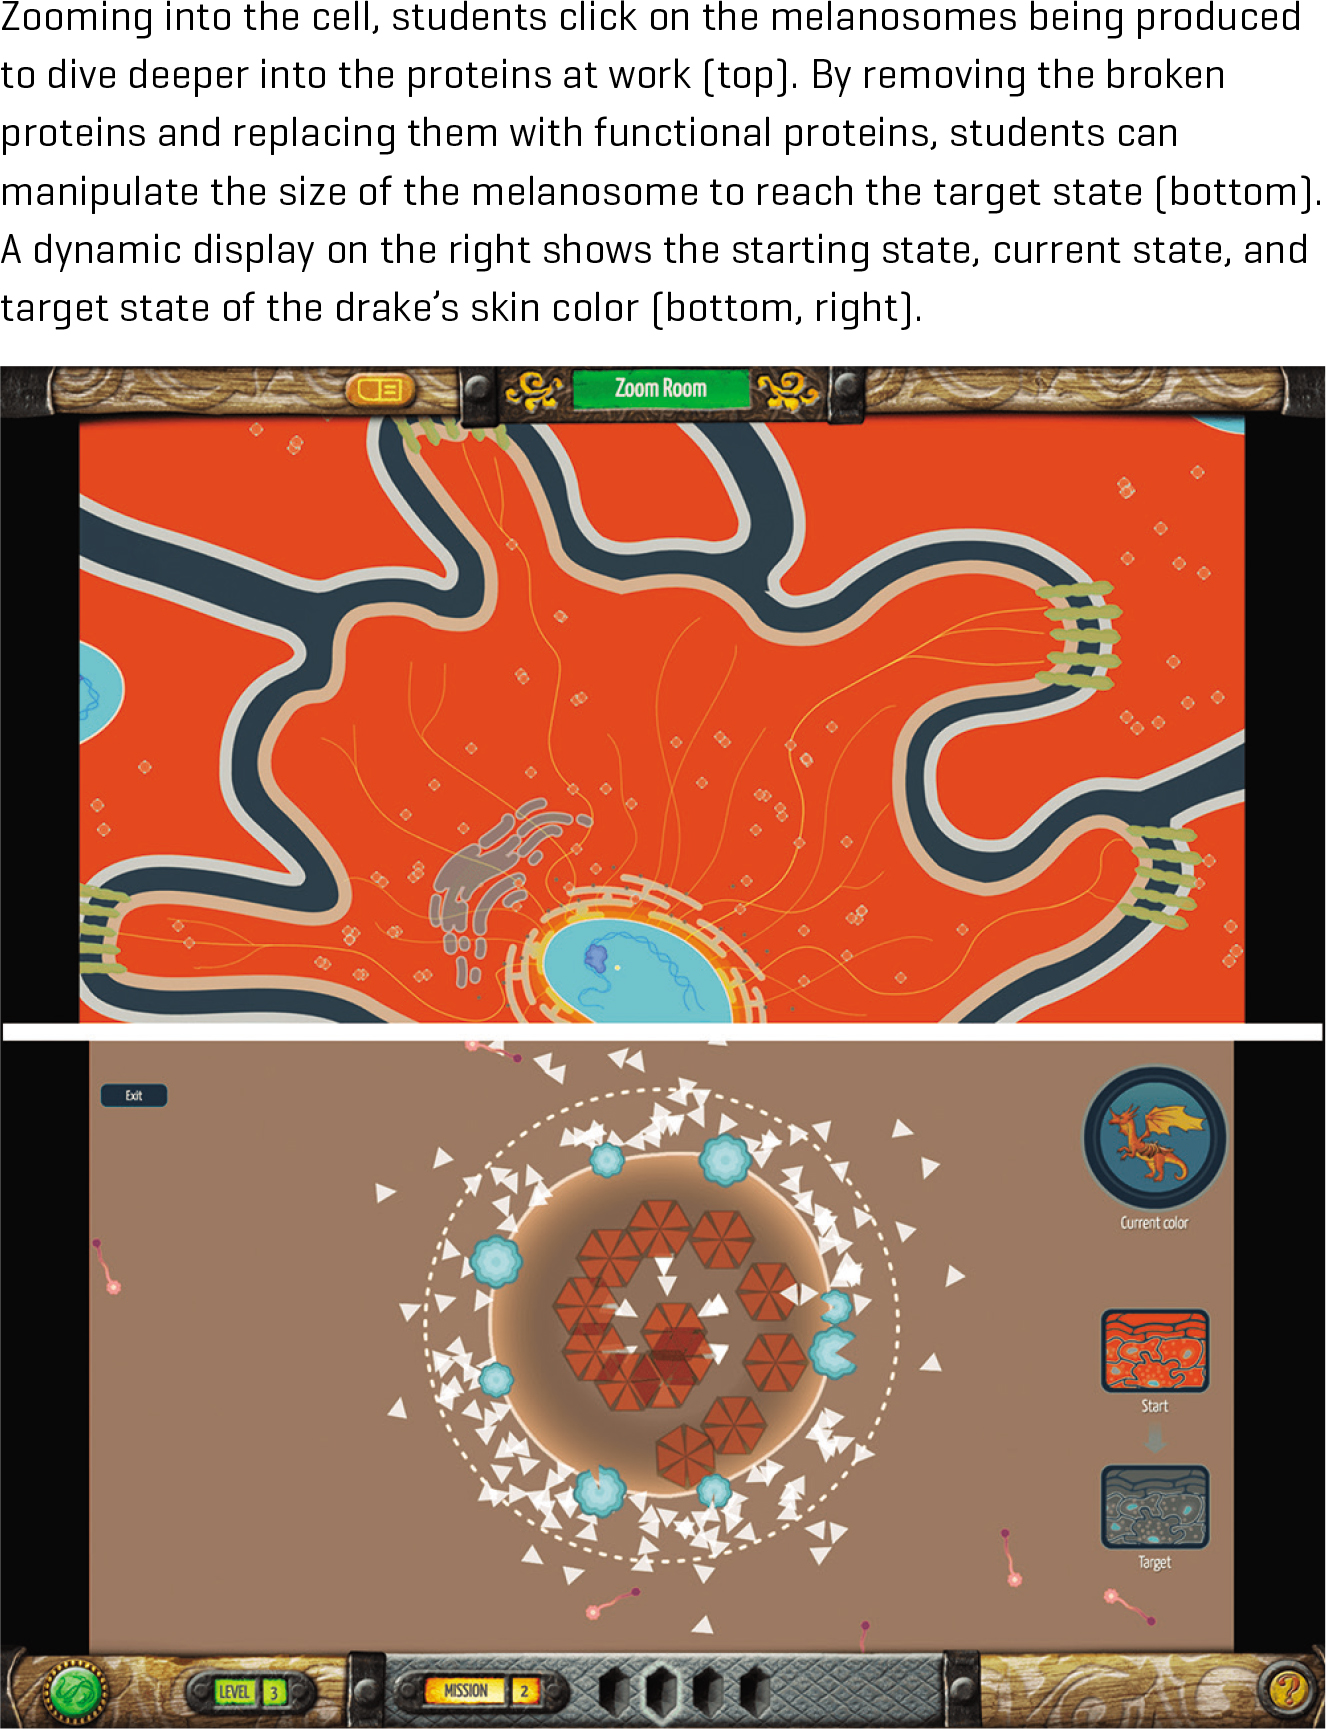 Zooming into the cell, students click on the melanosomes being produced to dive deeper into the proteins at work (top). By removing the broken proteins and replacing them with functional proteins, students can manipulate the size of the melanosome to reach the target state (bottom). A dynamic display on the right shows the starting state, current state, and target state of the drake’s skin color (bottom, right).